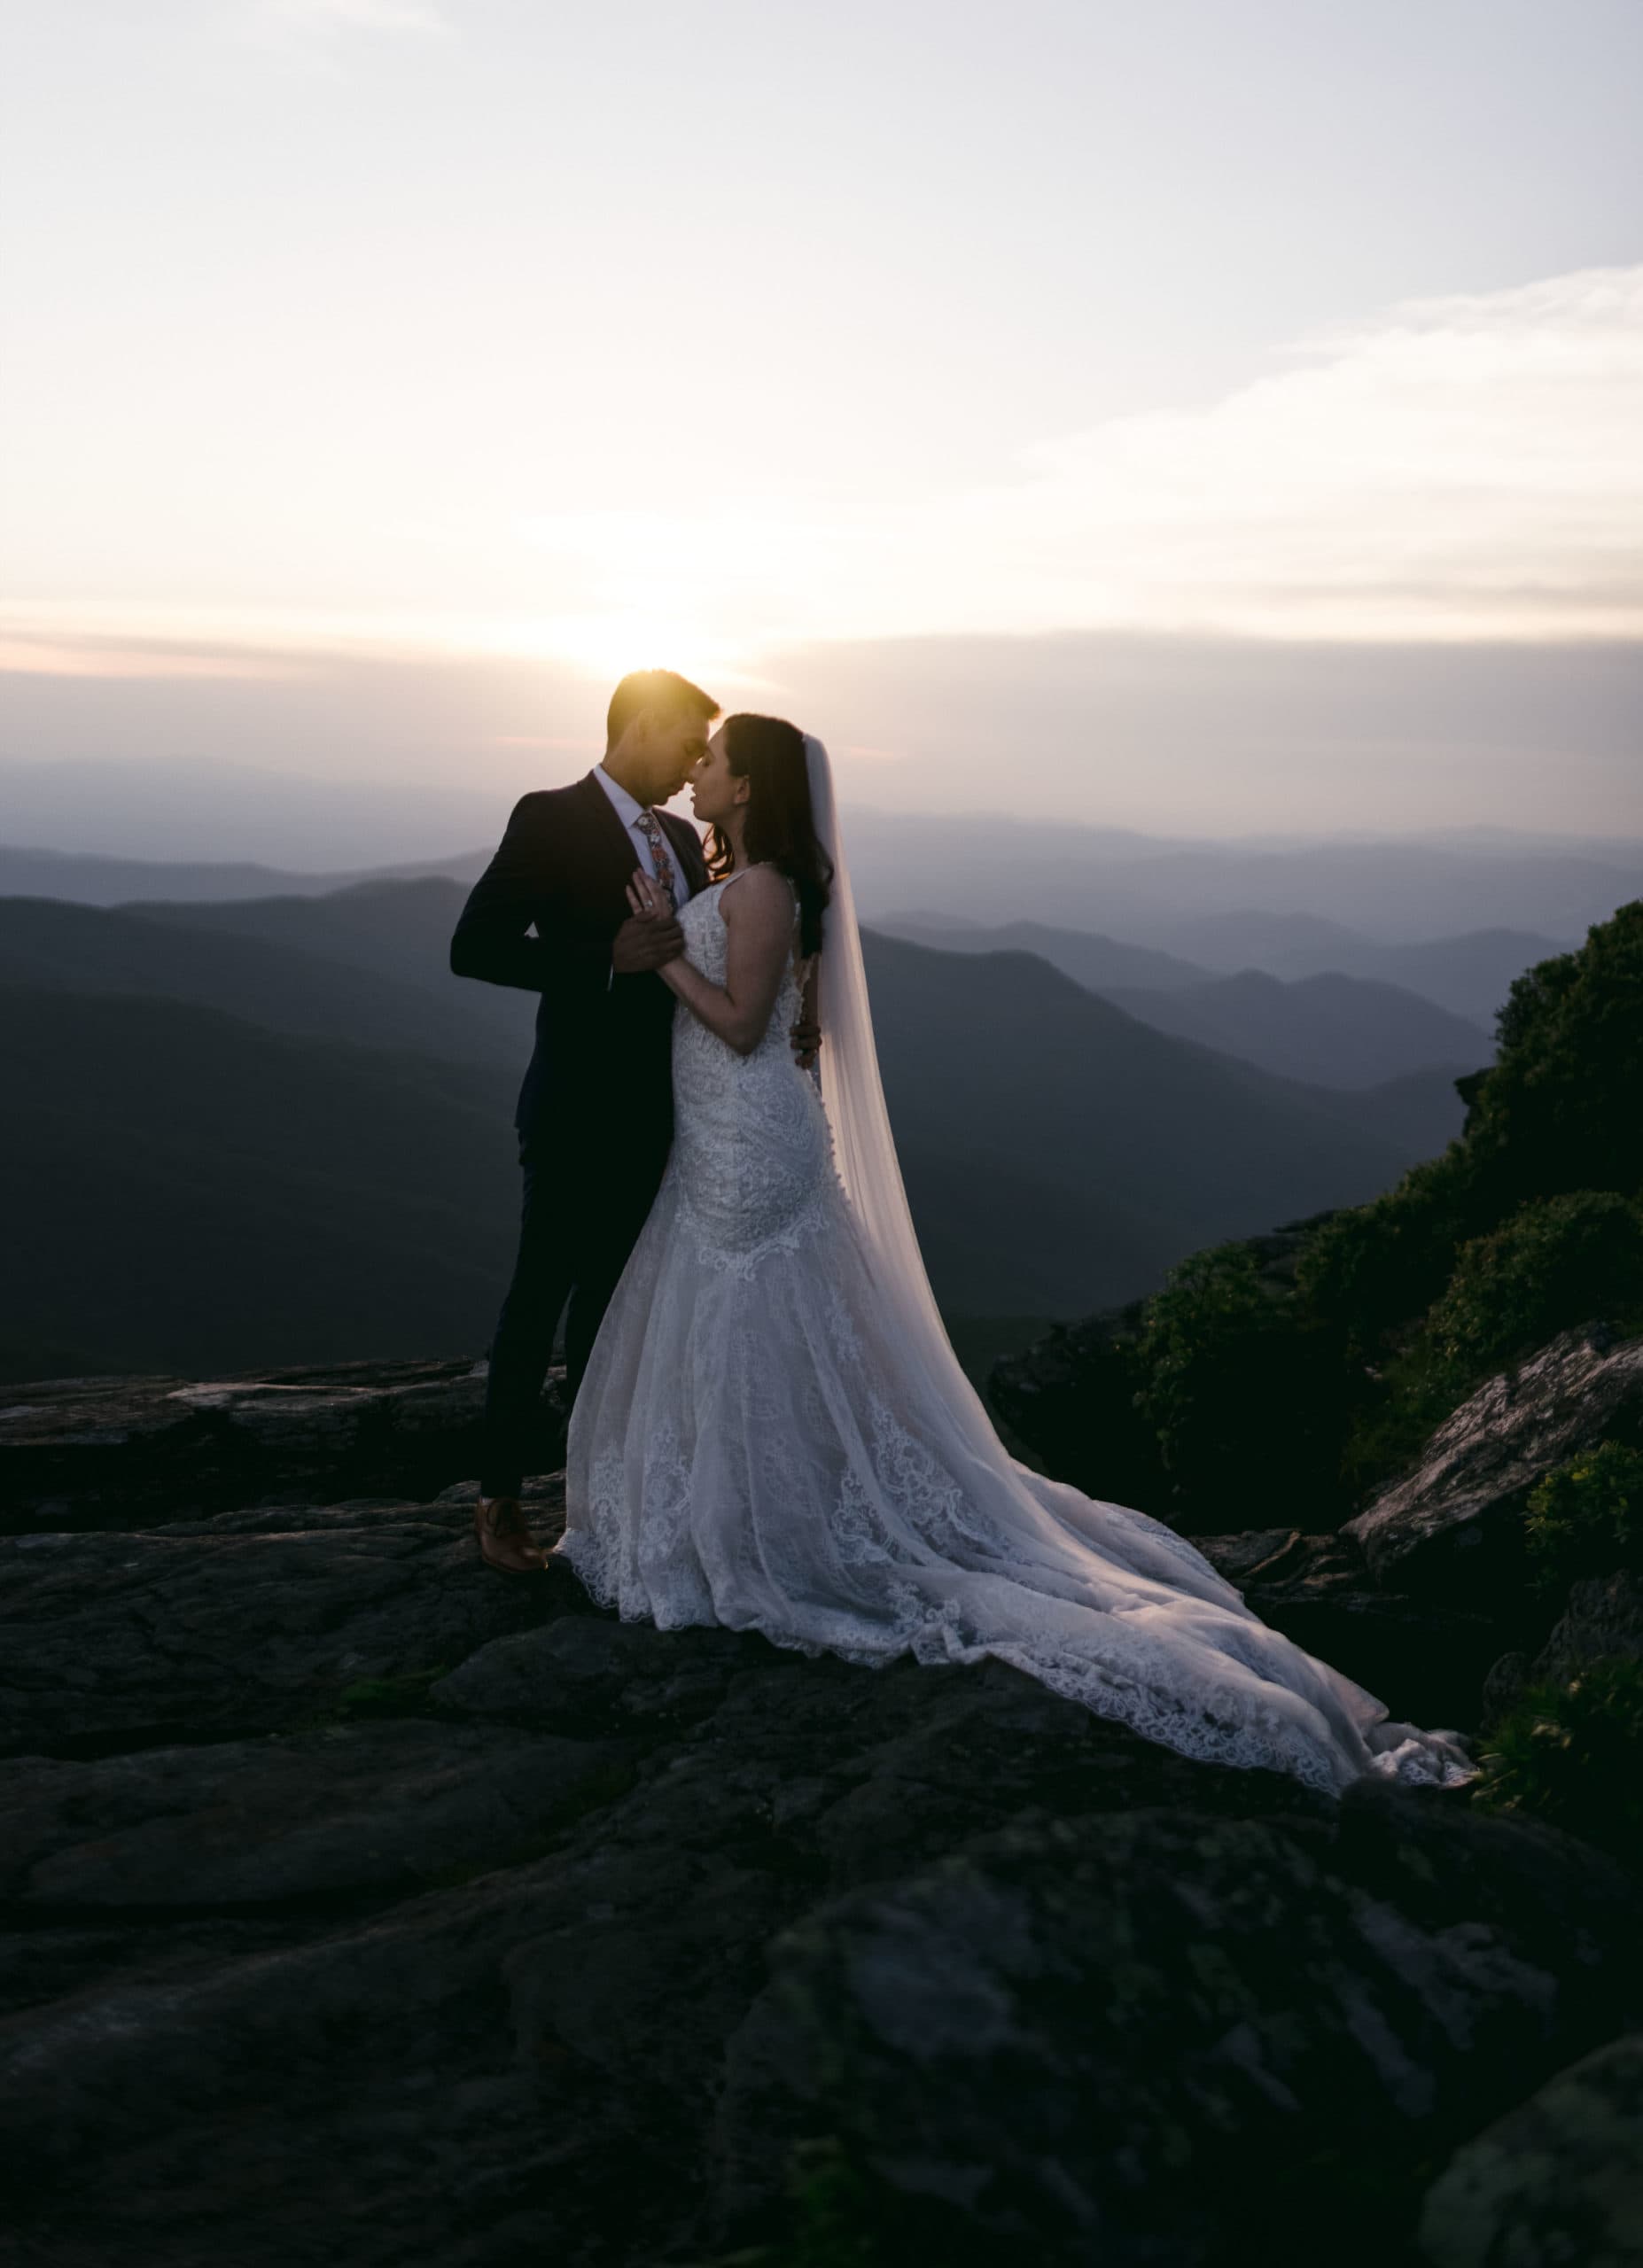 A couple that purchased an elopement package gets married on top of the mountains.